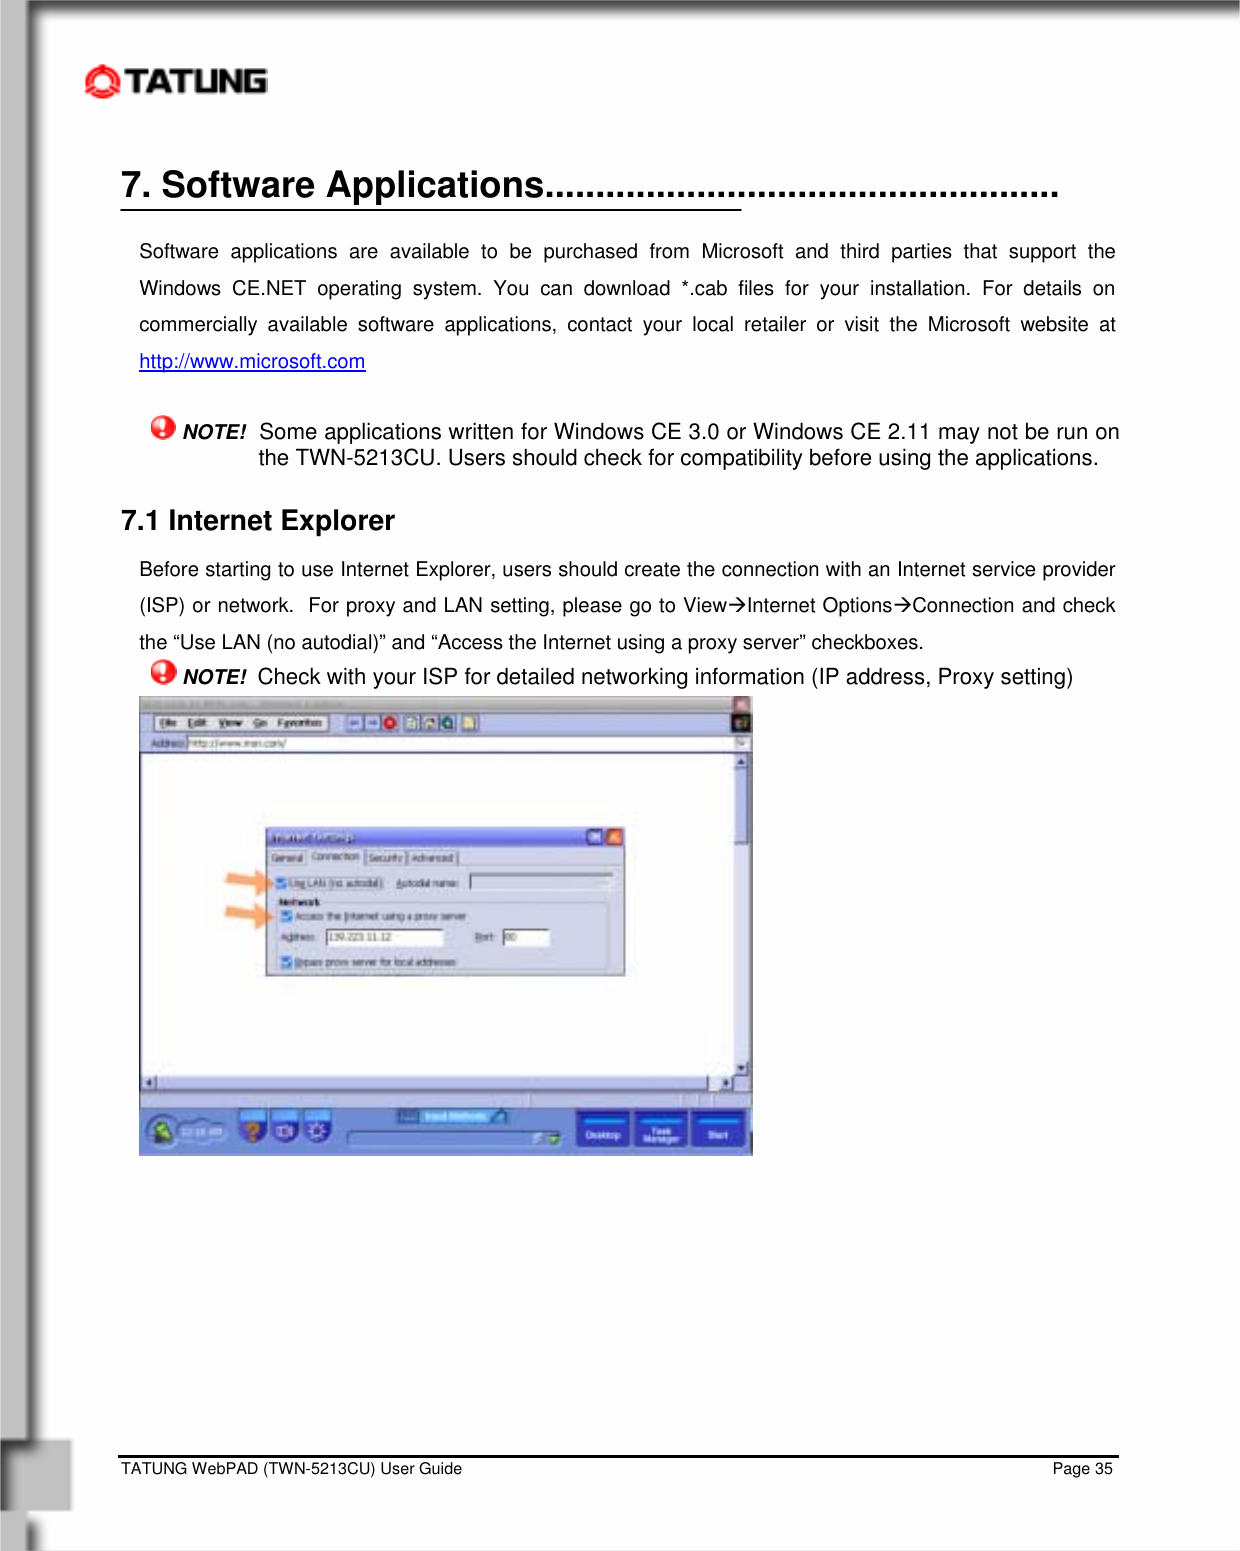    TATUNG WebPAD (TWN-5213CU) User Guide                                                                                                                                   Page 35 7. Software Applications...................................................  Software applications are available to be purchased from Microsoft and third parties that support the Windows CE.NET operating system. You can download *.cab files for your installation. For details on commercially available software applications, contact your local retailer or visit the Microsoft website at http://www.microsoft.com   NOTE!  Some applications written for Windows CE 3.0 or Windows CE 2.11 may not be run on the TWN-5213CU. Users should check for compatibility before using the applications. 7.1 Internet Explorer  Before starting to use Internet Explorer, users should create the connection with an Internet service provider (ISP) or network.  For proxy and LAN setting, please go to ViewÆInternet OptionsÆConnection and check the “Use LAN (no autodial)” and “Access the Internet using a proxy server” checkboxes.  NOTE!  Check with your ISP for detailed networking information (IP address, Proxy setting)   